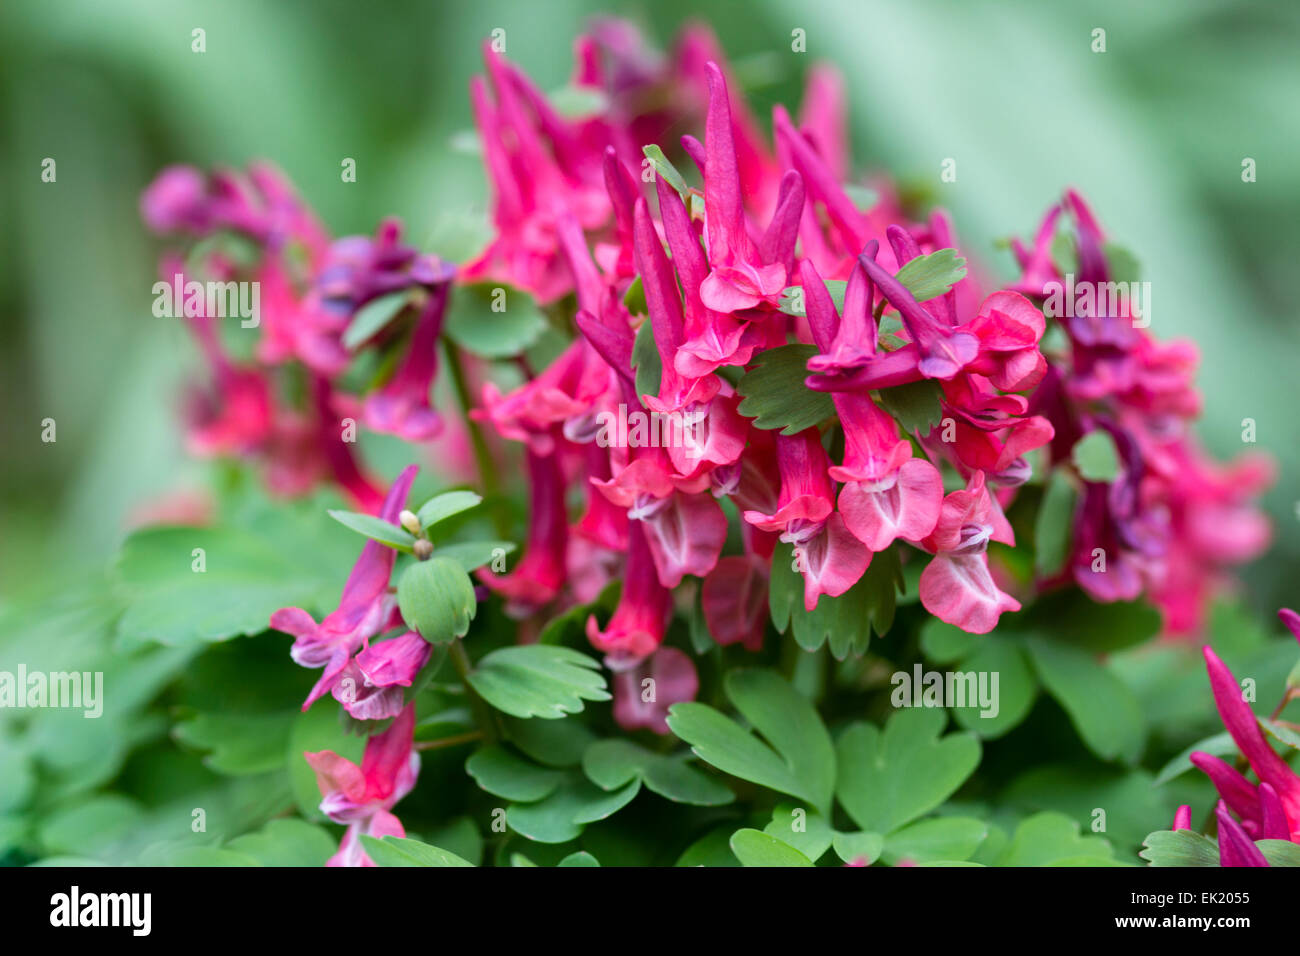 Spurred red-pink flowers of the early spring flowering Corydalis solida 'George Baker' Stock Photo